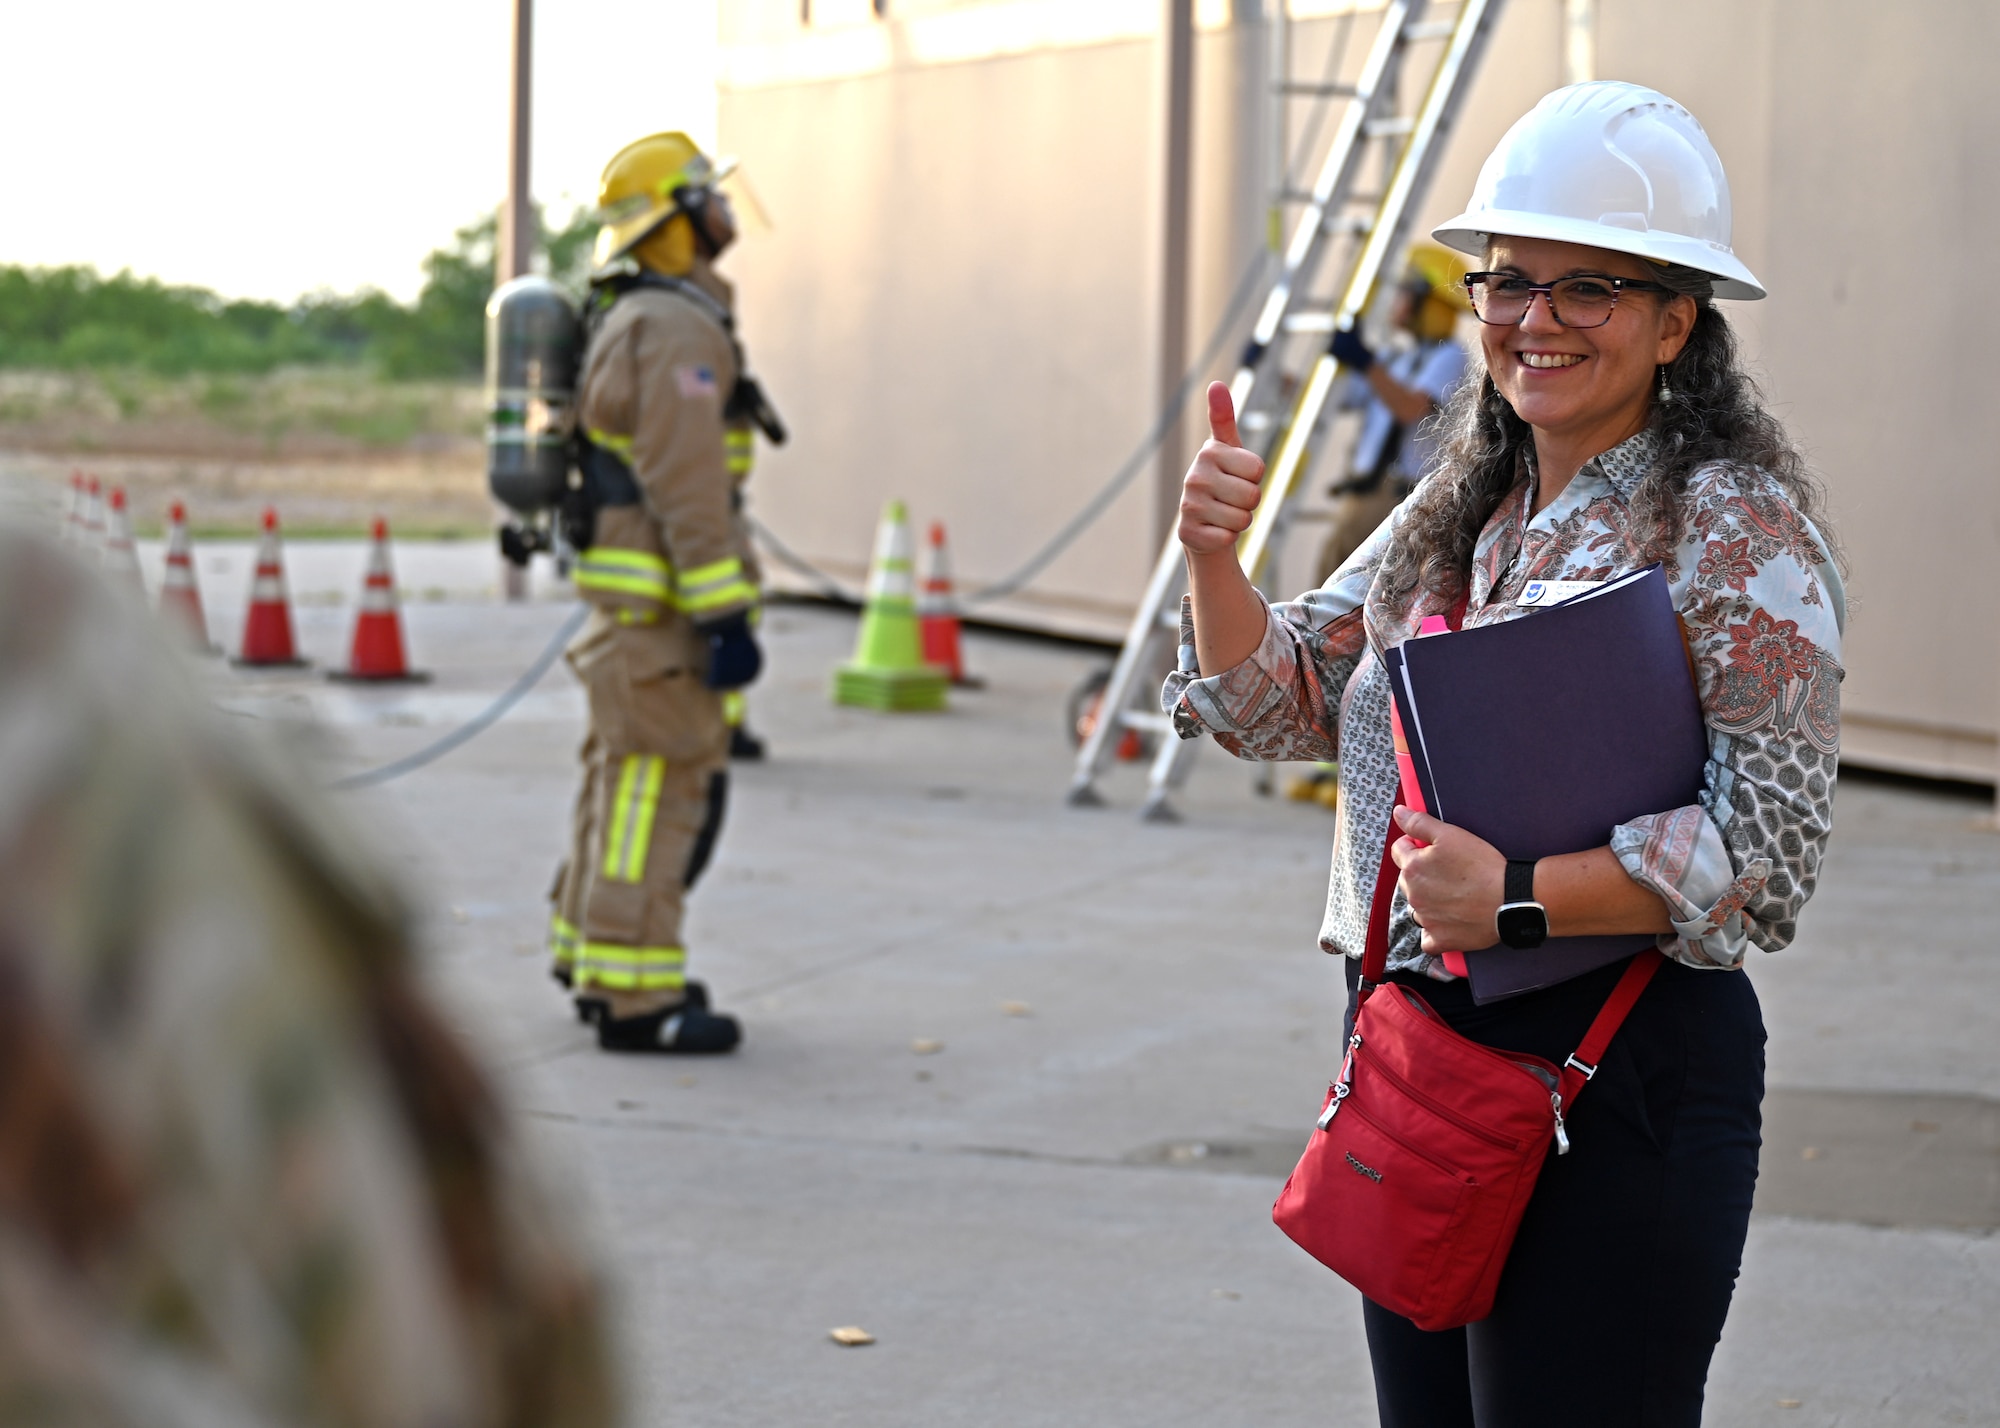 Dr. Wendy Walsh, Air Education and Training Command chief learning officer, gives a thumbs up at the Louis F. Garland Department of Defense Fire Academy, Goodfellow Air Force Base, Texas, Aug. 8, 2023. The Louis F. Garland DoD Fire Academy is the largest fire training facility in the world and graduates over 1,400 joint service students each year. (U.S. Air Force photo by Senior Airman Sarah Williams)